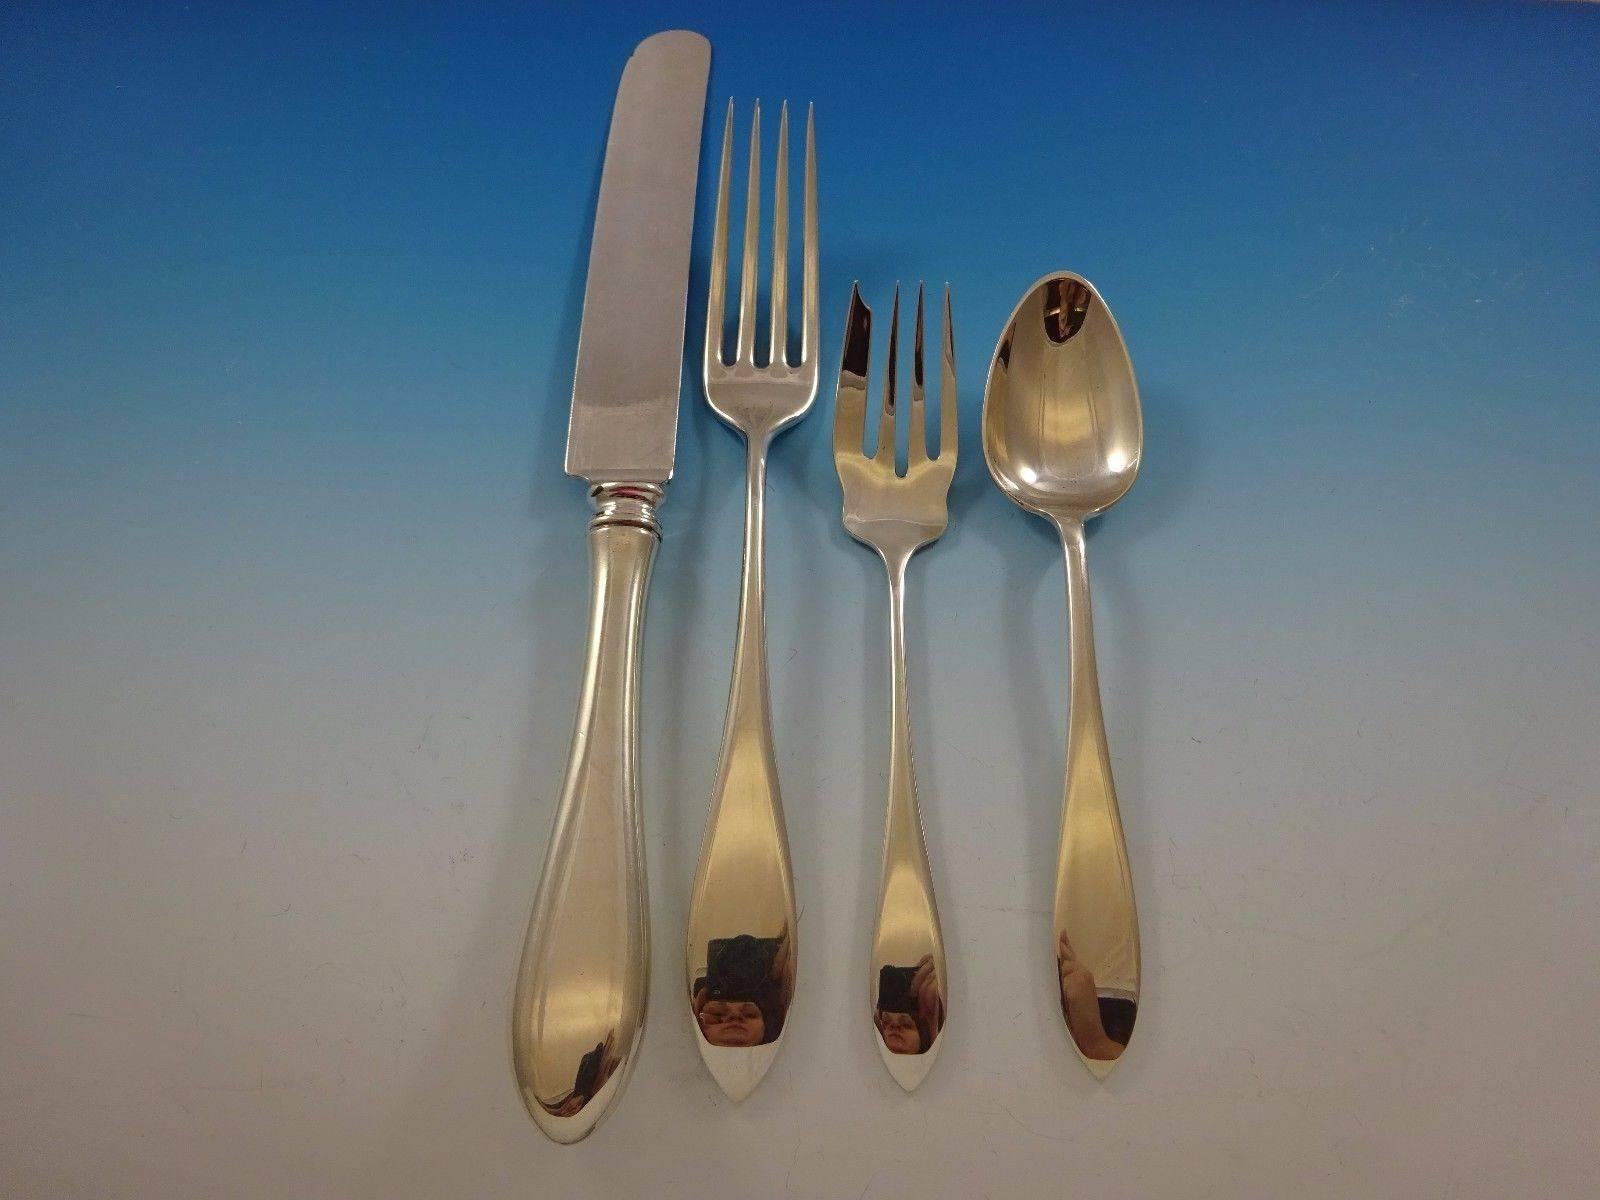 Wallace sterling silver brings elegance to any table setting. Established in 1835, Wallace is a preeminent New England silversmith renowned for exceptional quality and craftsmanship.

Puritan by Wallace sterling silver flatware set of 48 pieces.